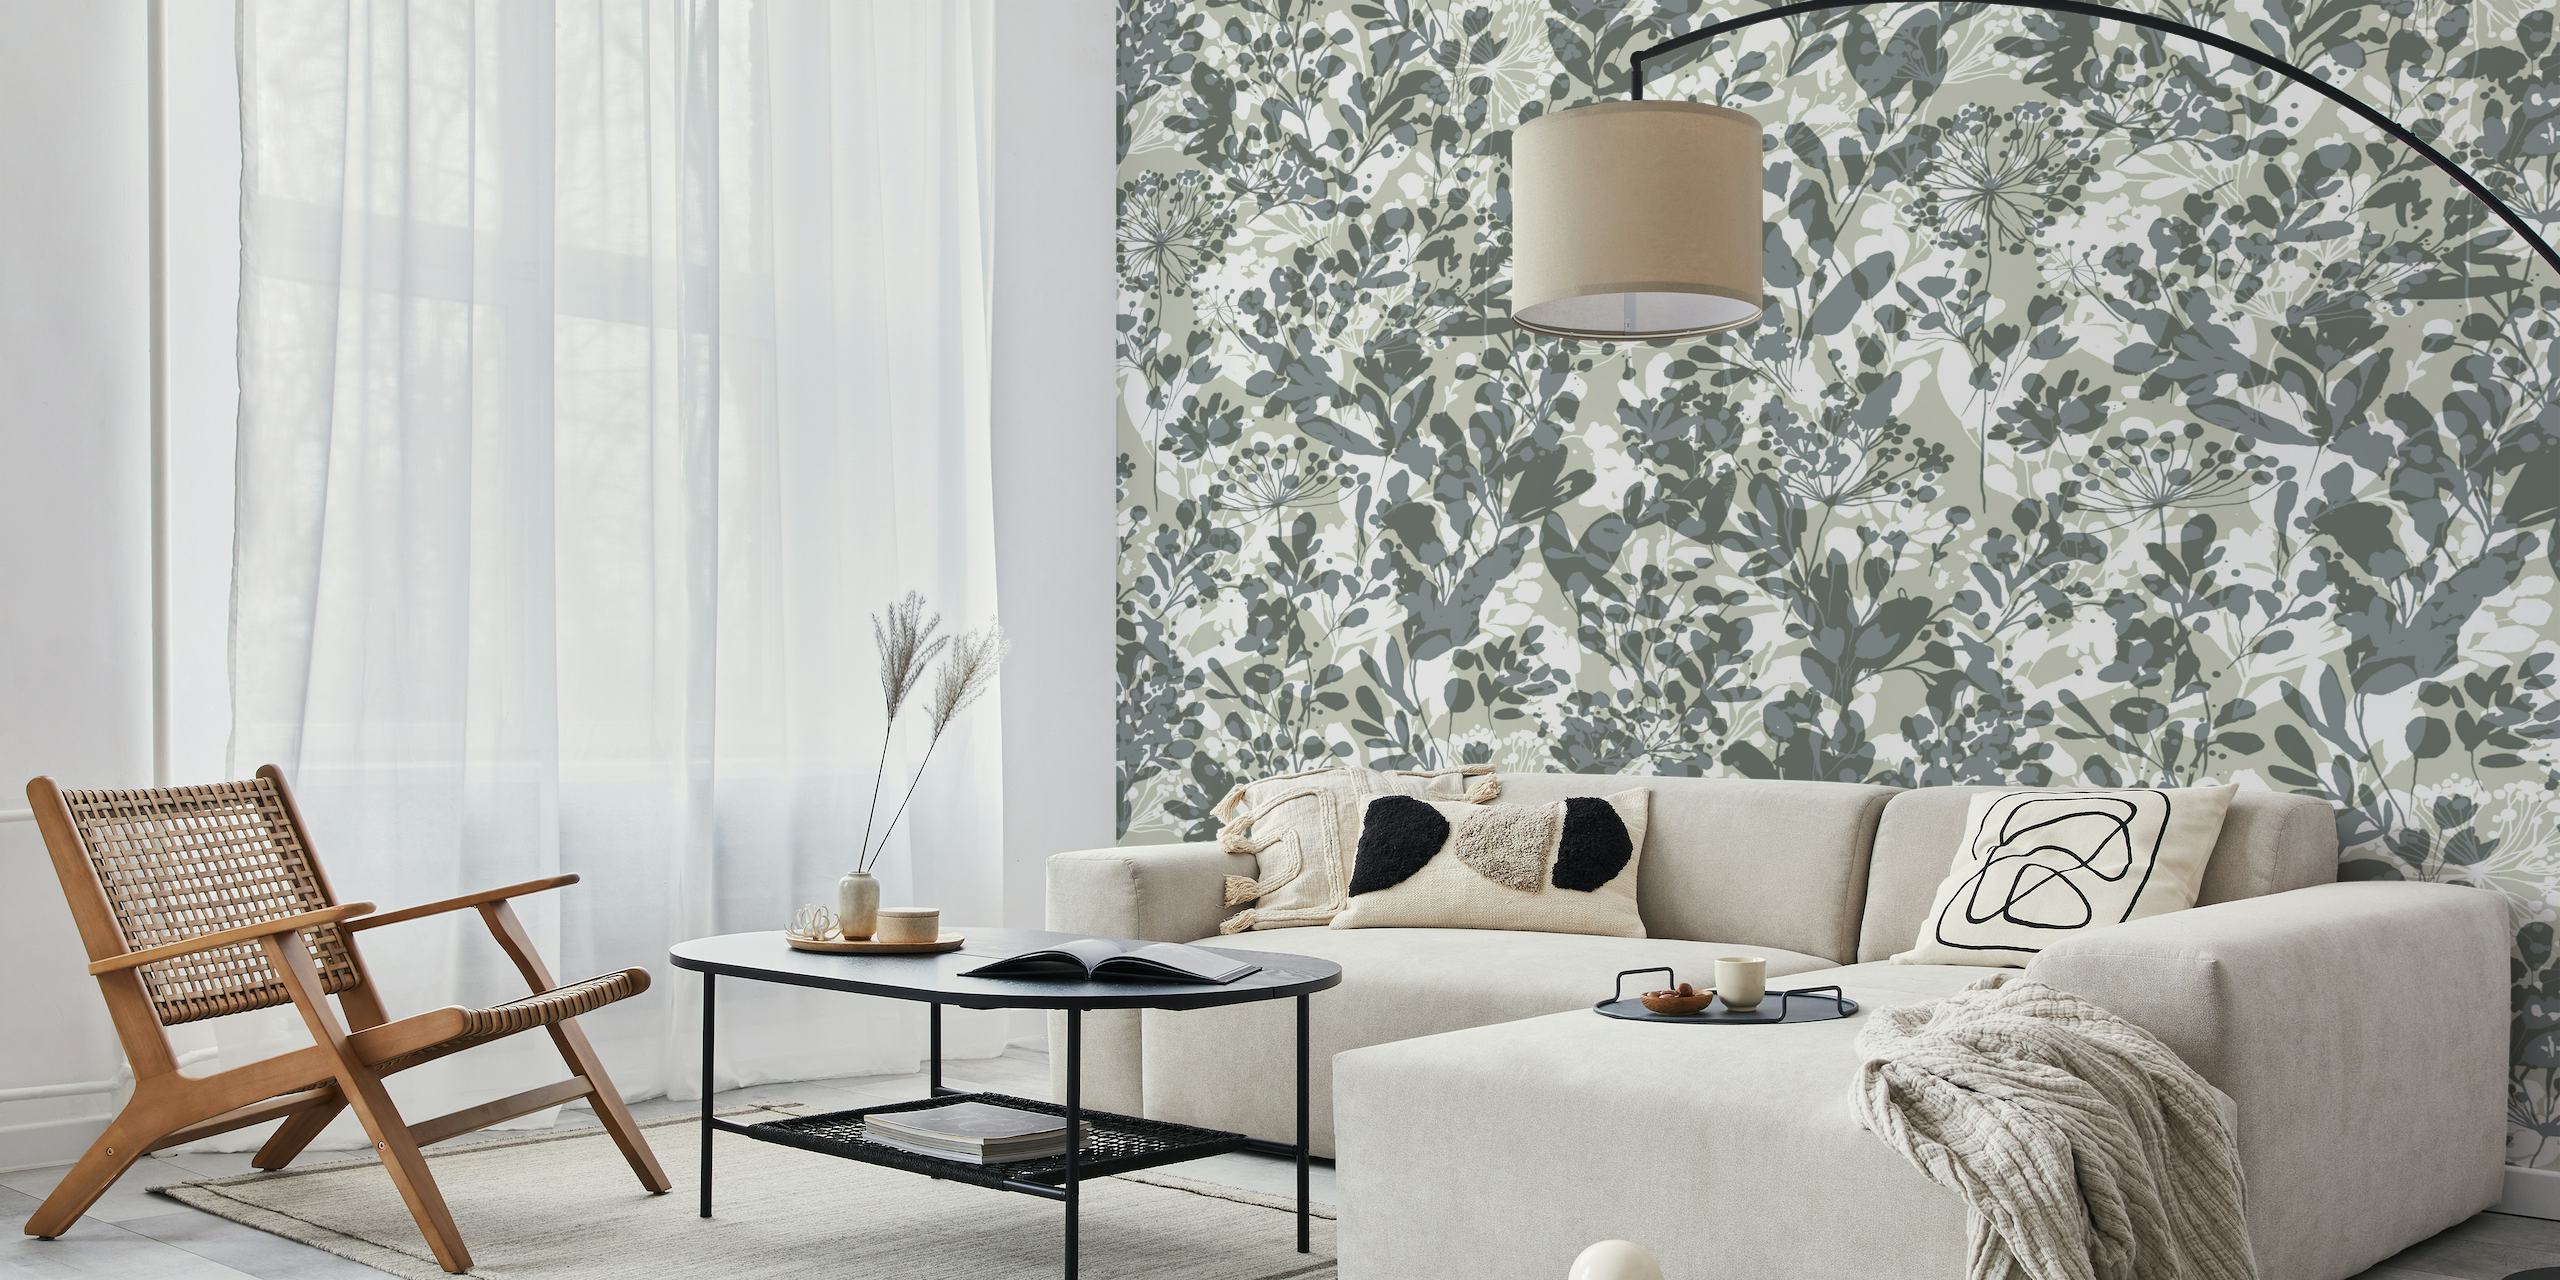 A peaceful wall mural depicting winter wild grasses in shades of grey.